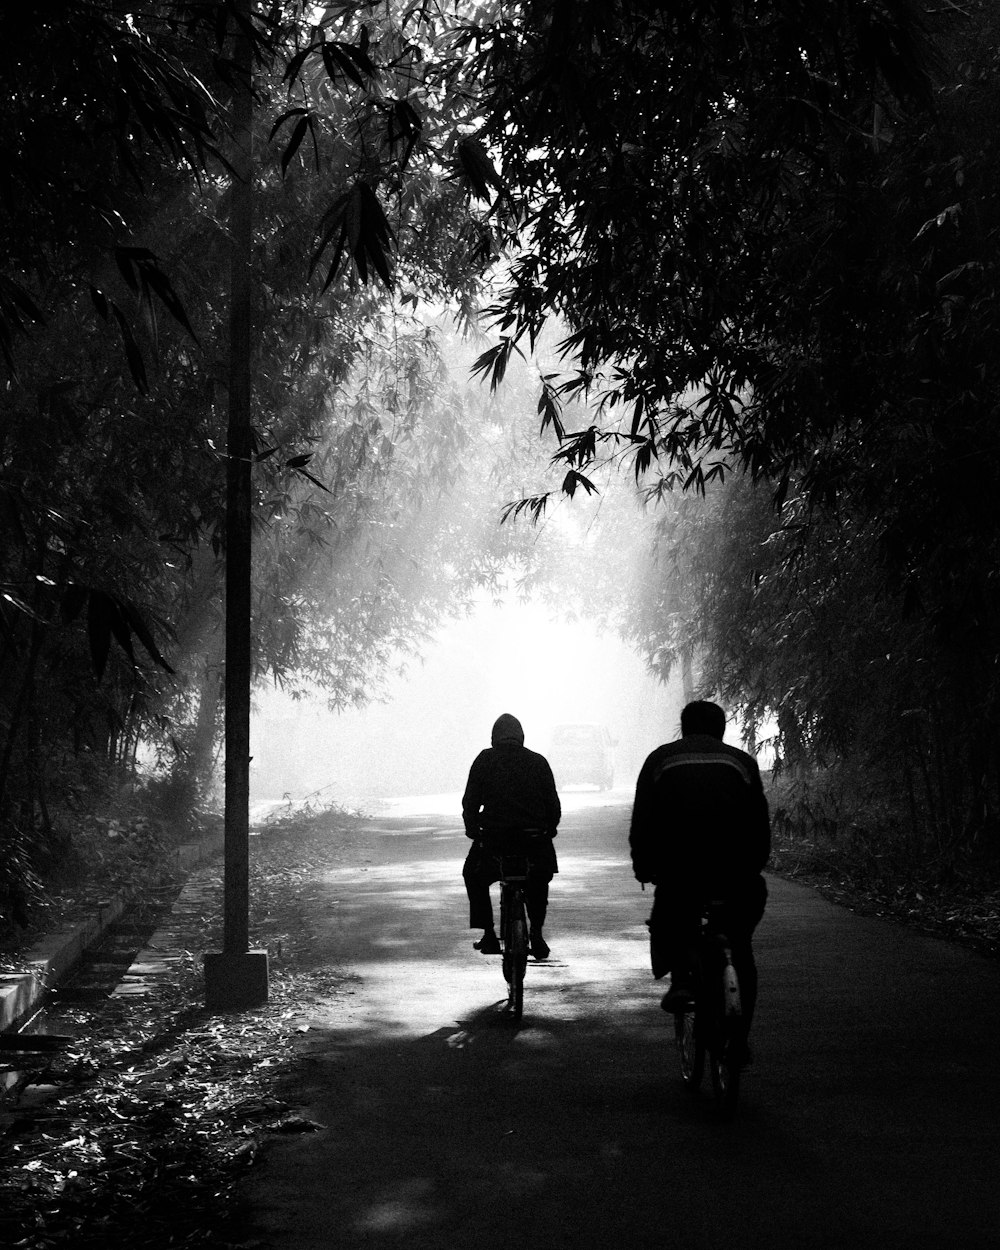 two people riding bikes on a path